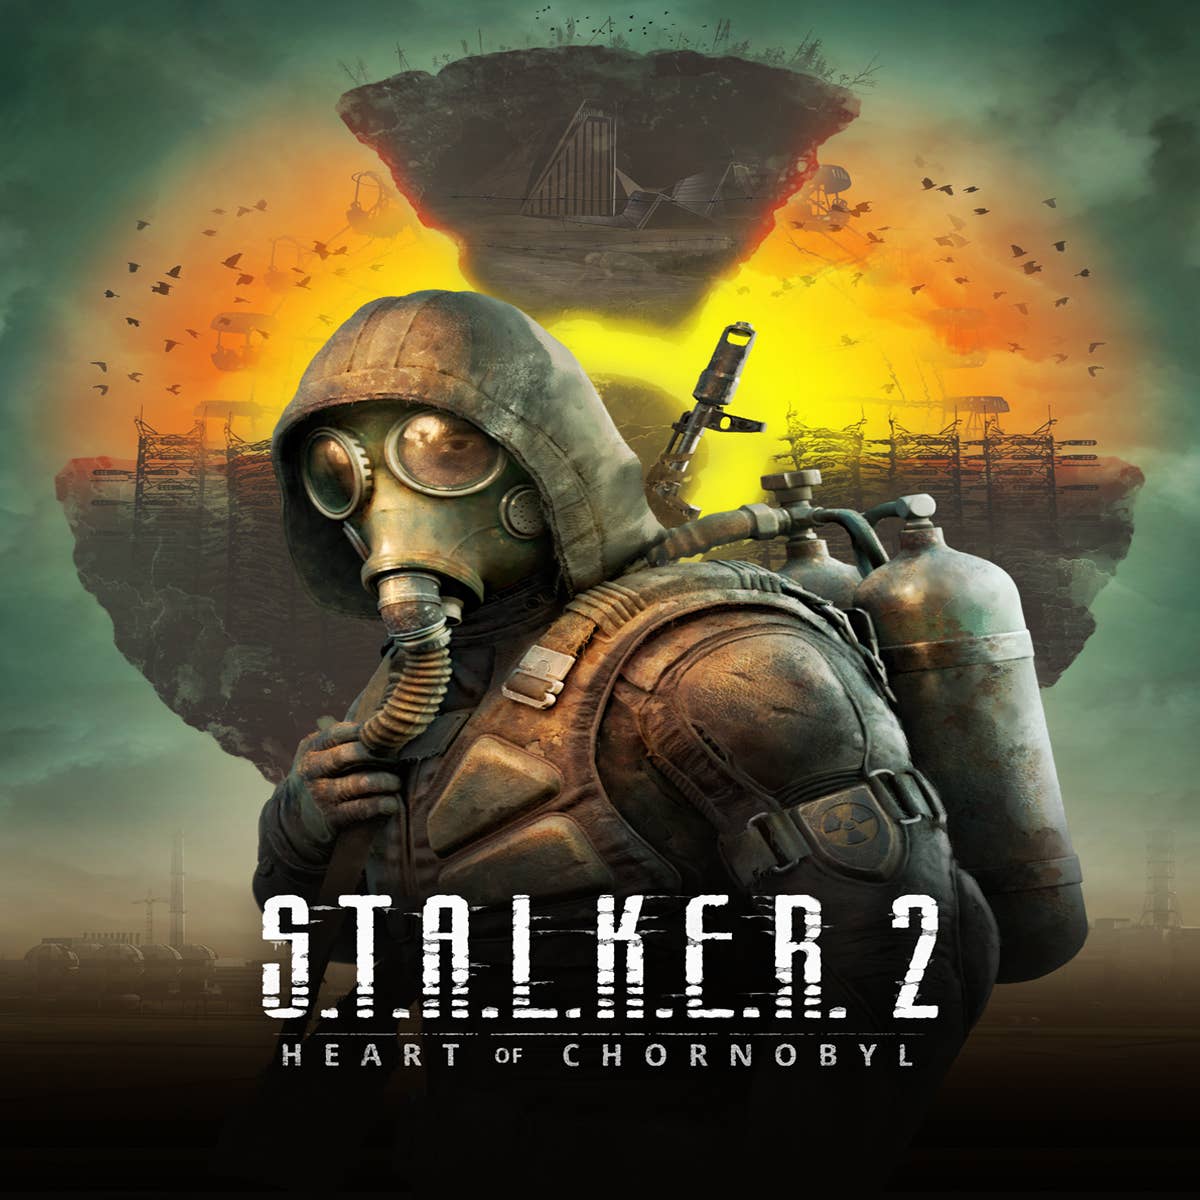 STALKER 2 aiming to arrive early 2023, according to Xbox showcase